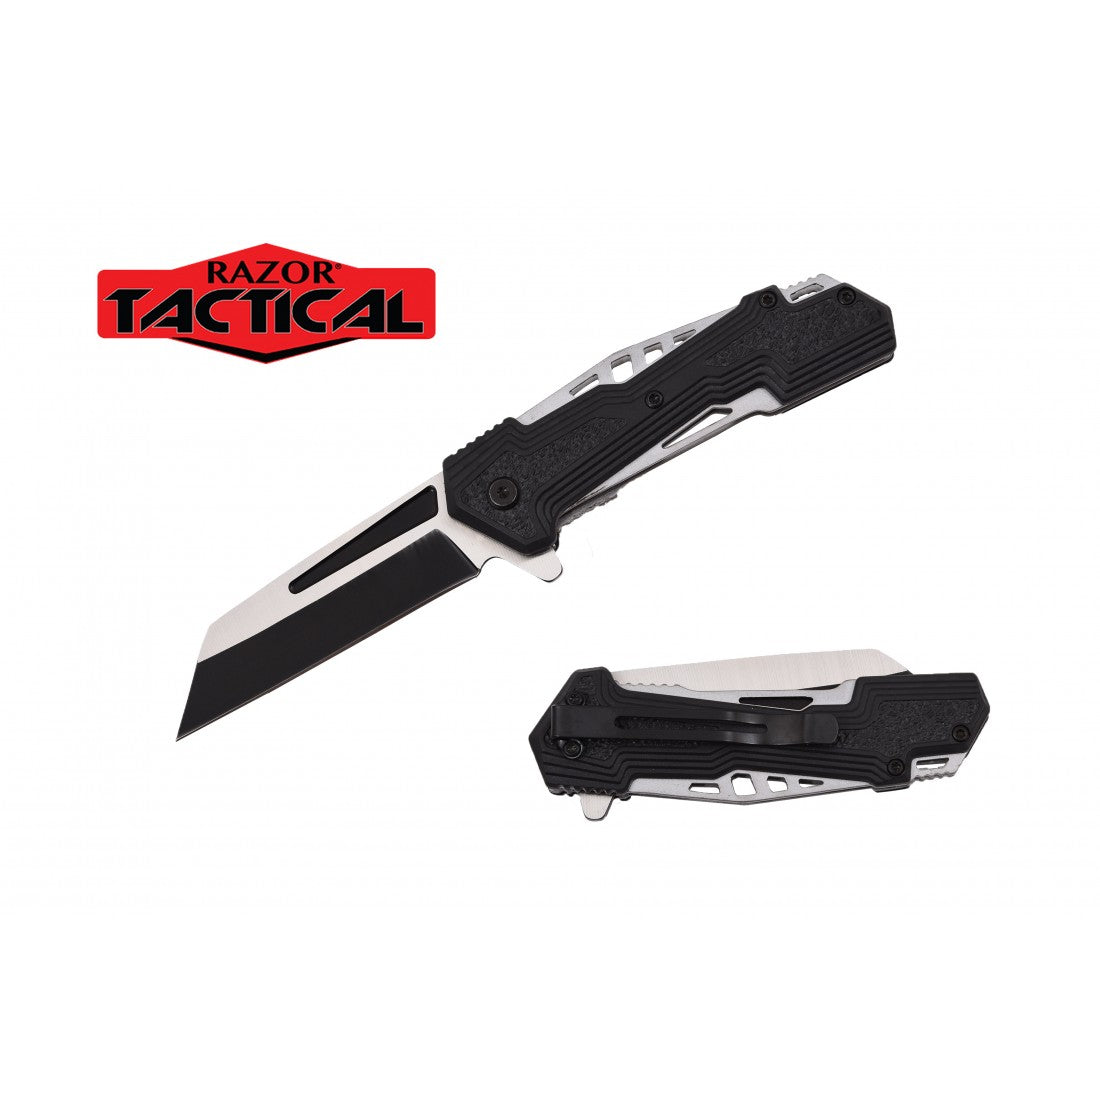 Spring Assist Knife, Coping Blade ABS Handle 4.5" Closed. (120/12/13*10*17/36)-RT-7133 - MK Distro